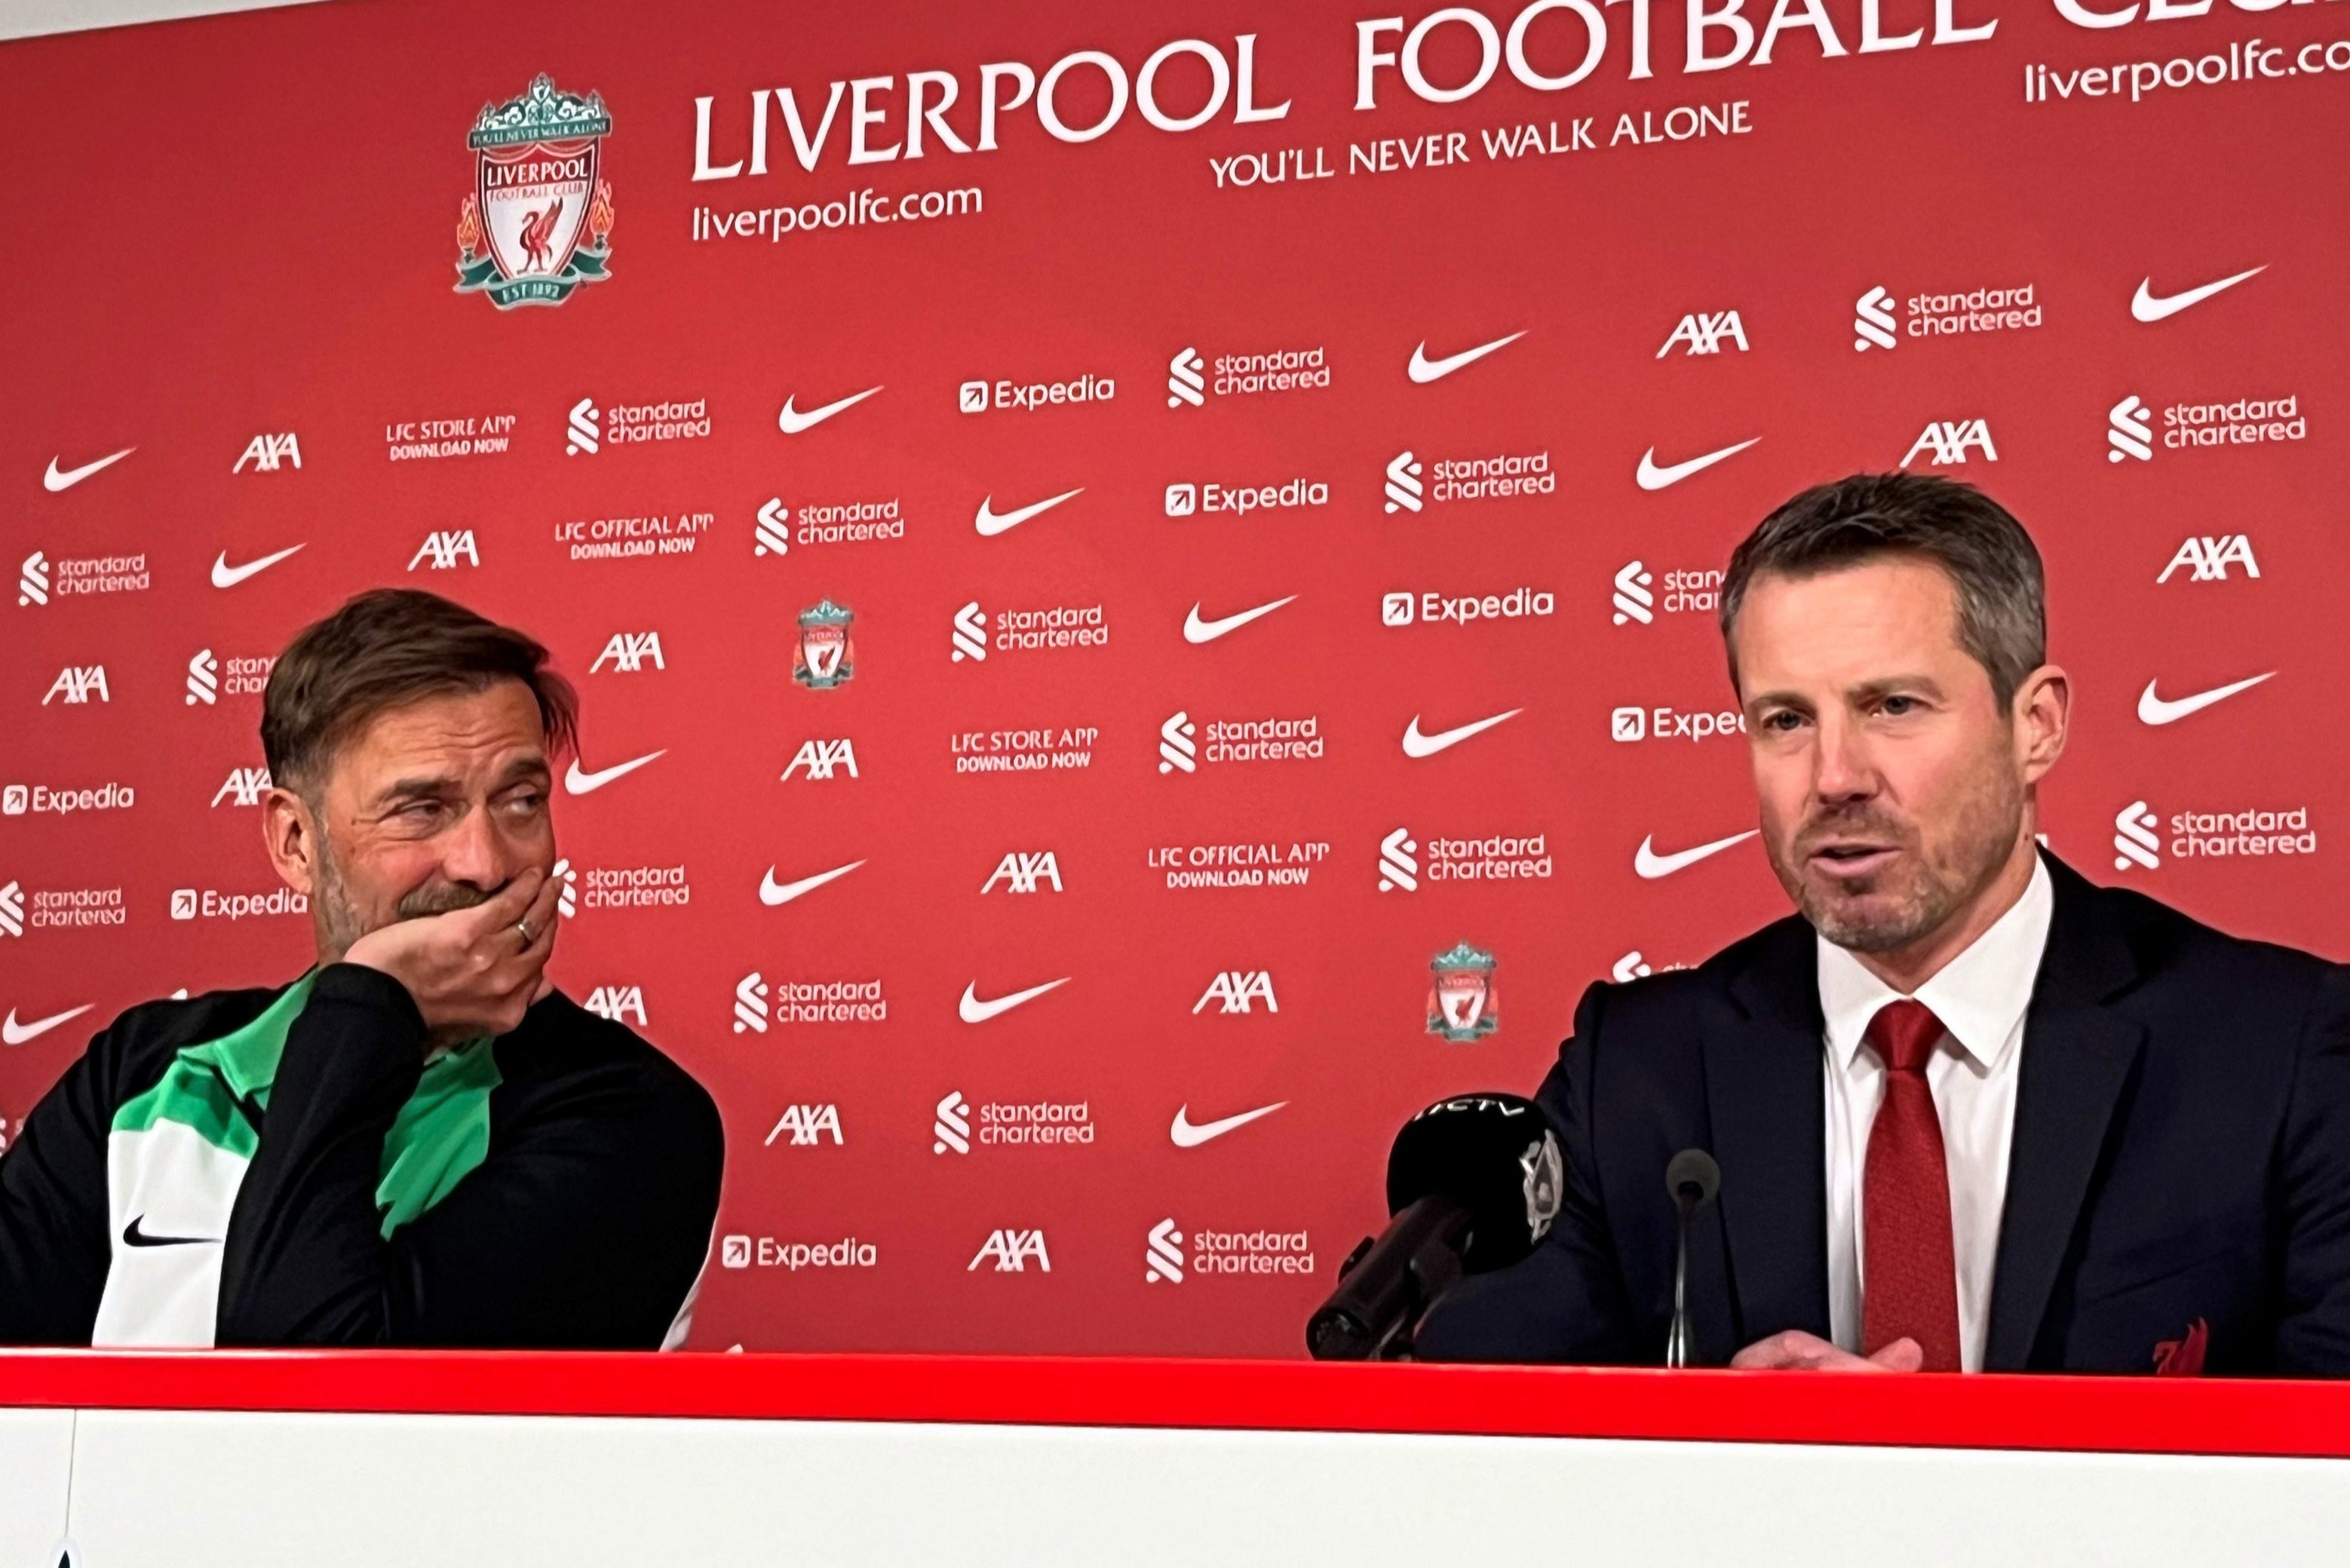 CEO Billy Hogan will lead the search to replace Jurgen Klopp as Liverpool coach